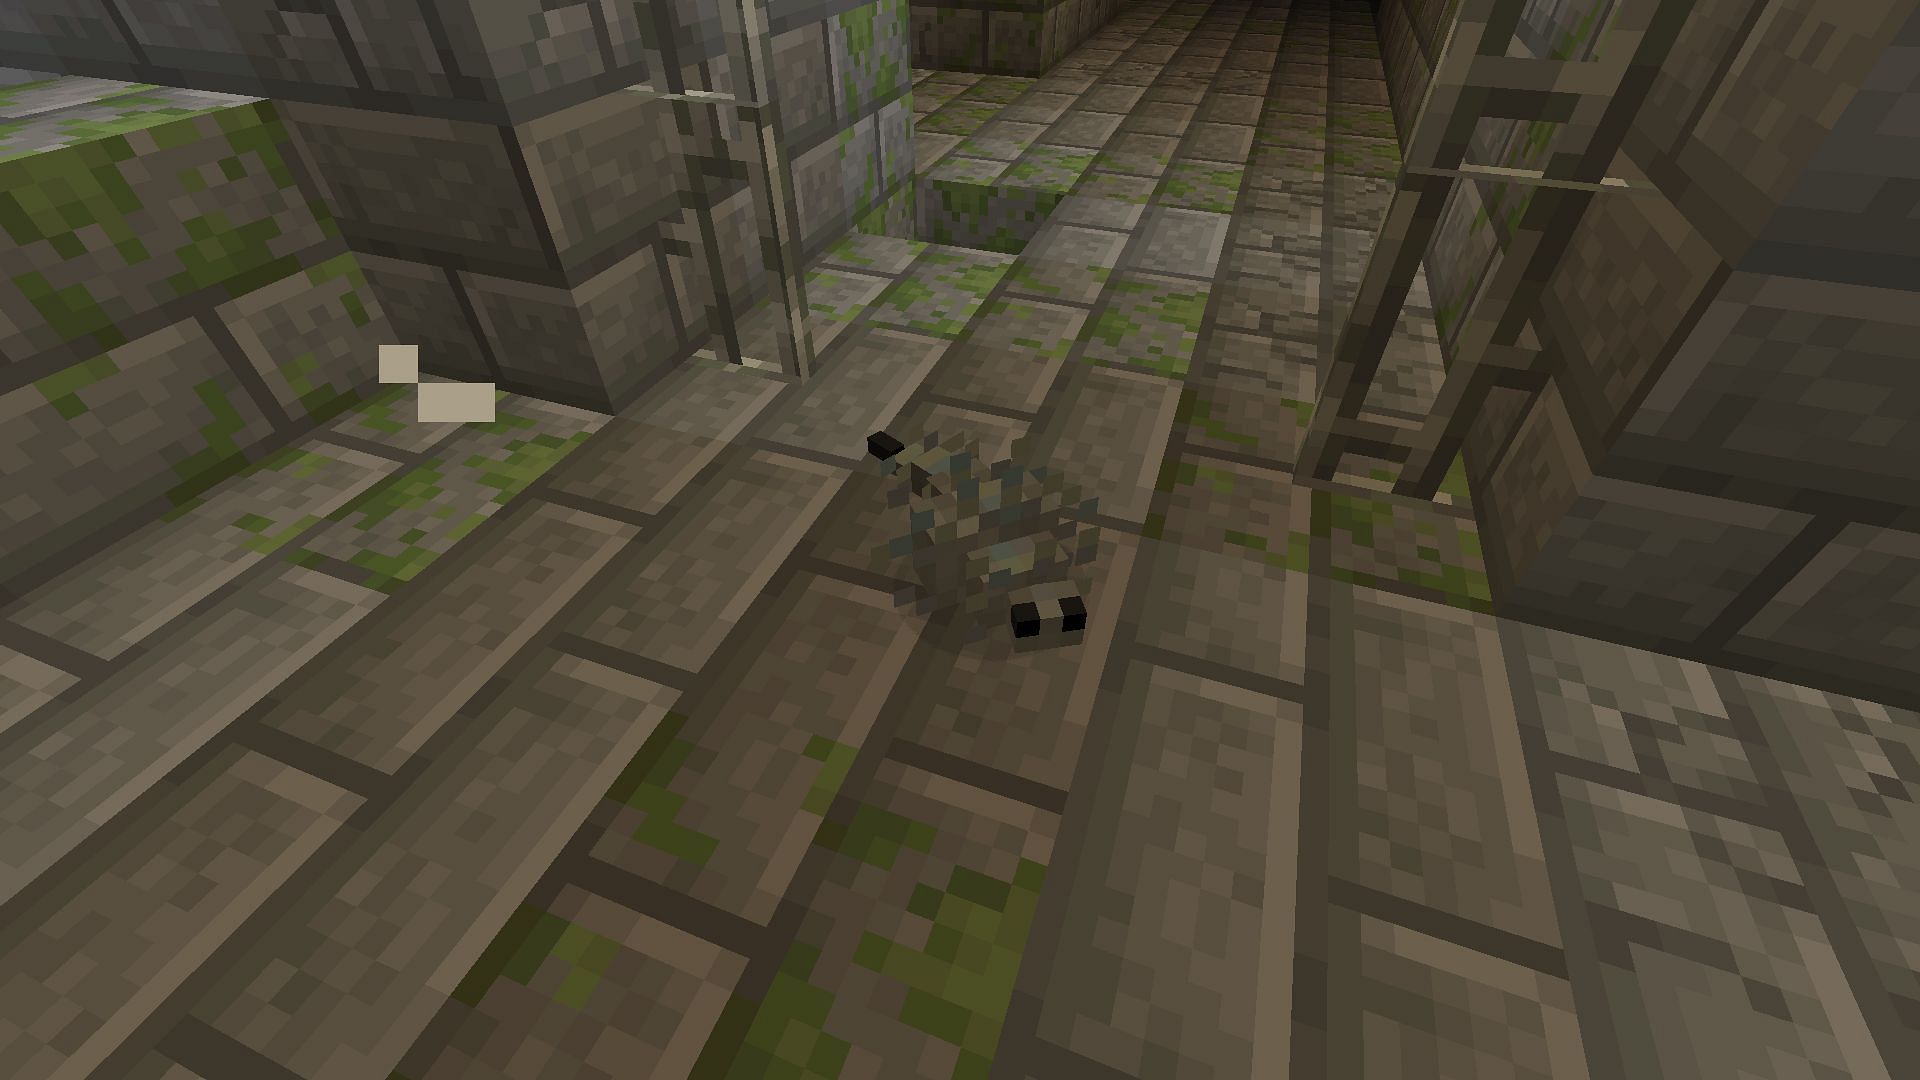 A silverfish spawned from an infested brick (Image via Minecraft)